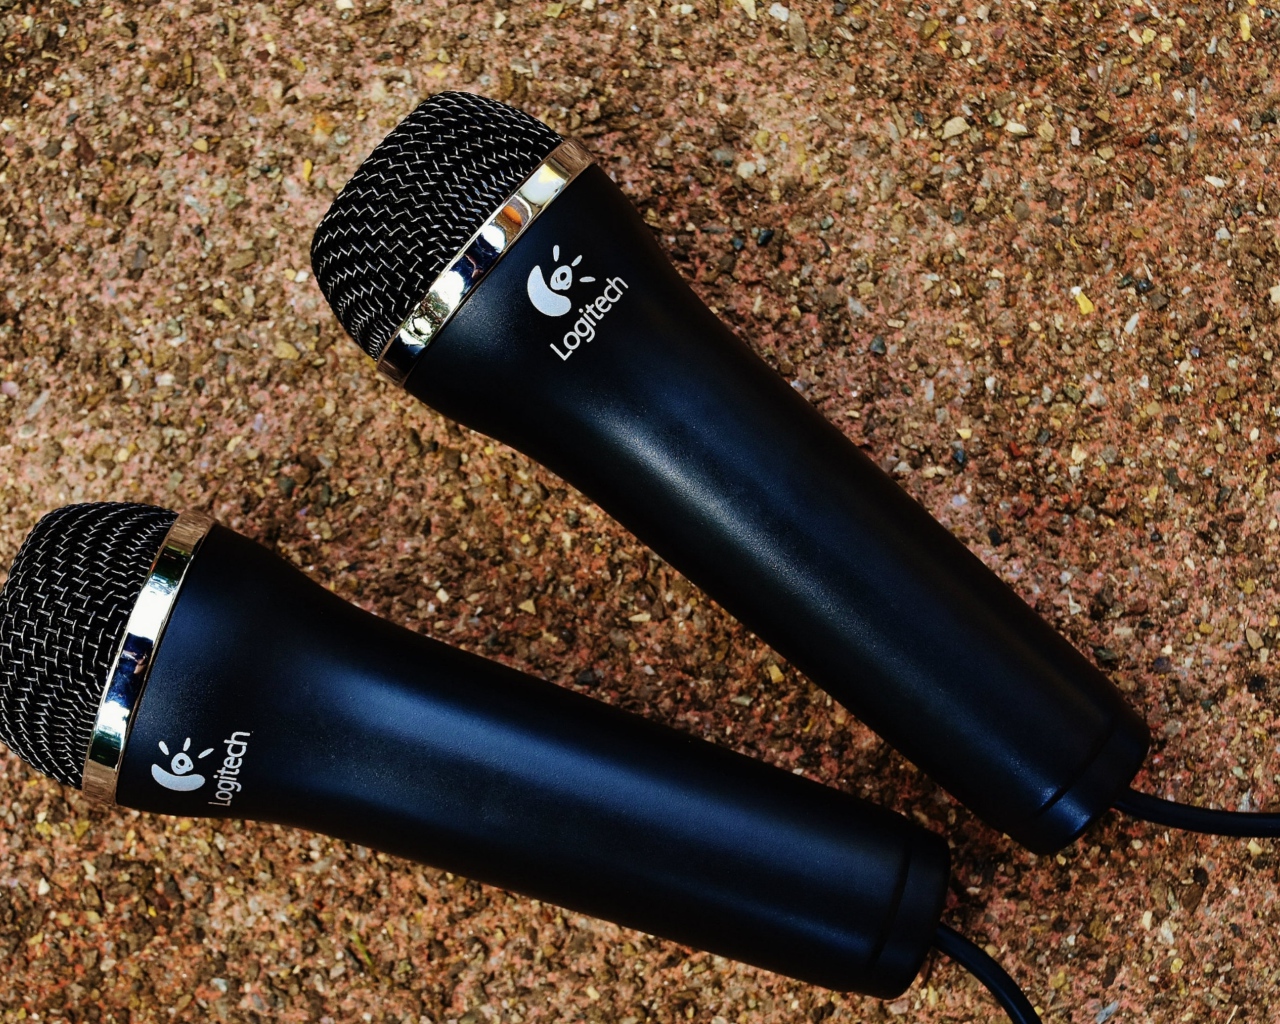 Two Logitech microphones on the pavement